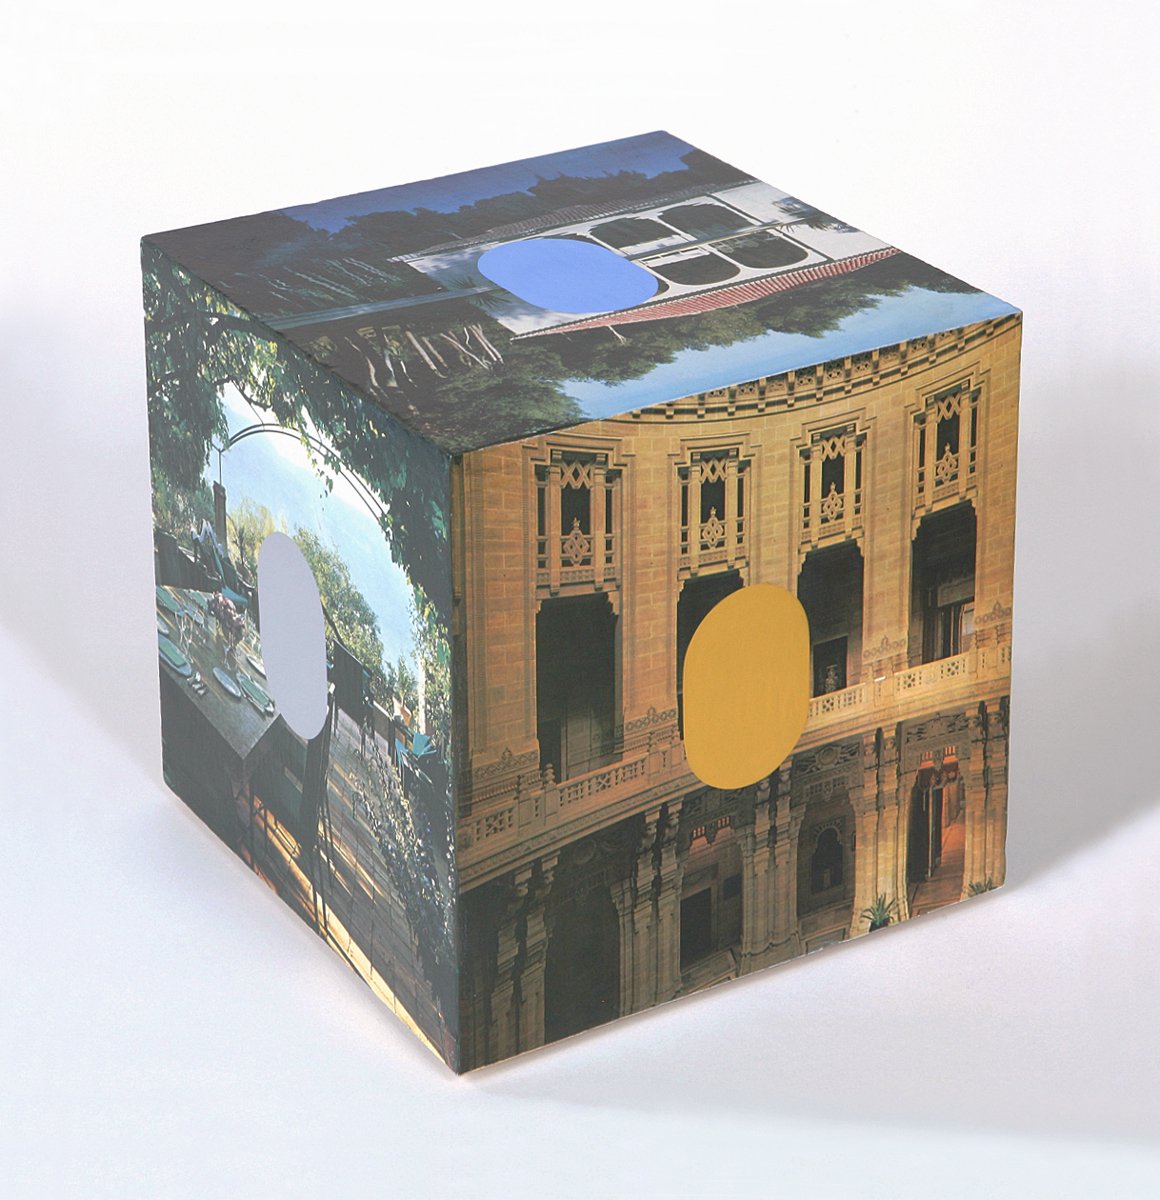 A cube with architectural images and blue, grey and ochre ovals on the outside.